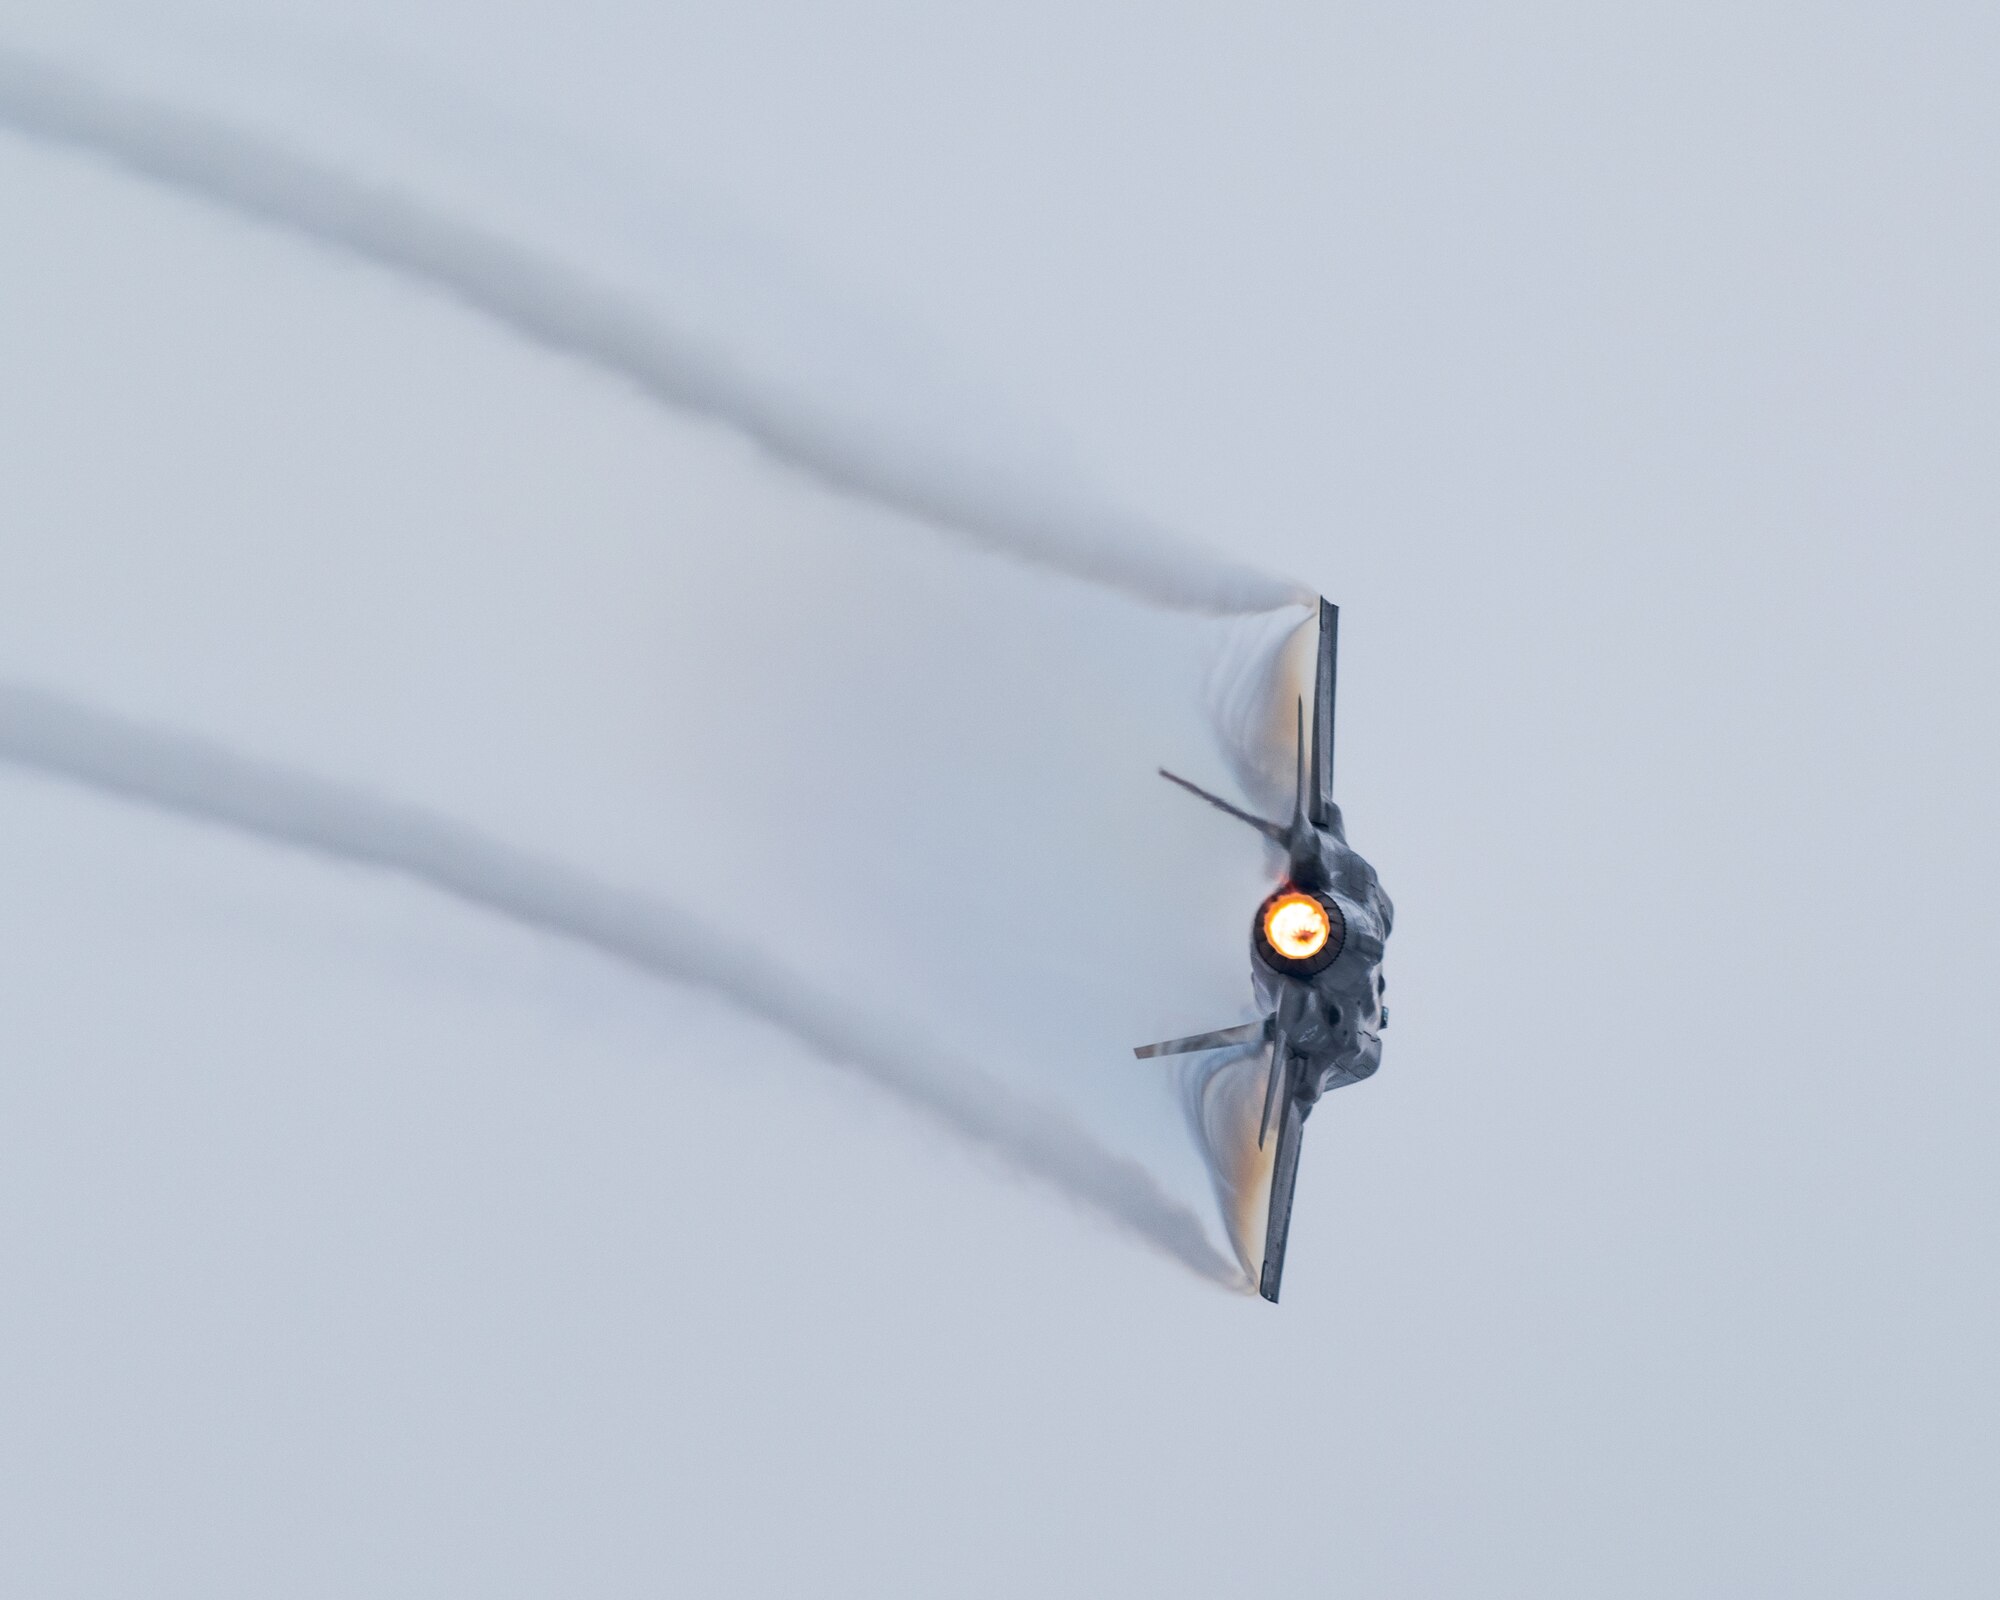 An F-35A Lightning II banking during a demonstration practice.